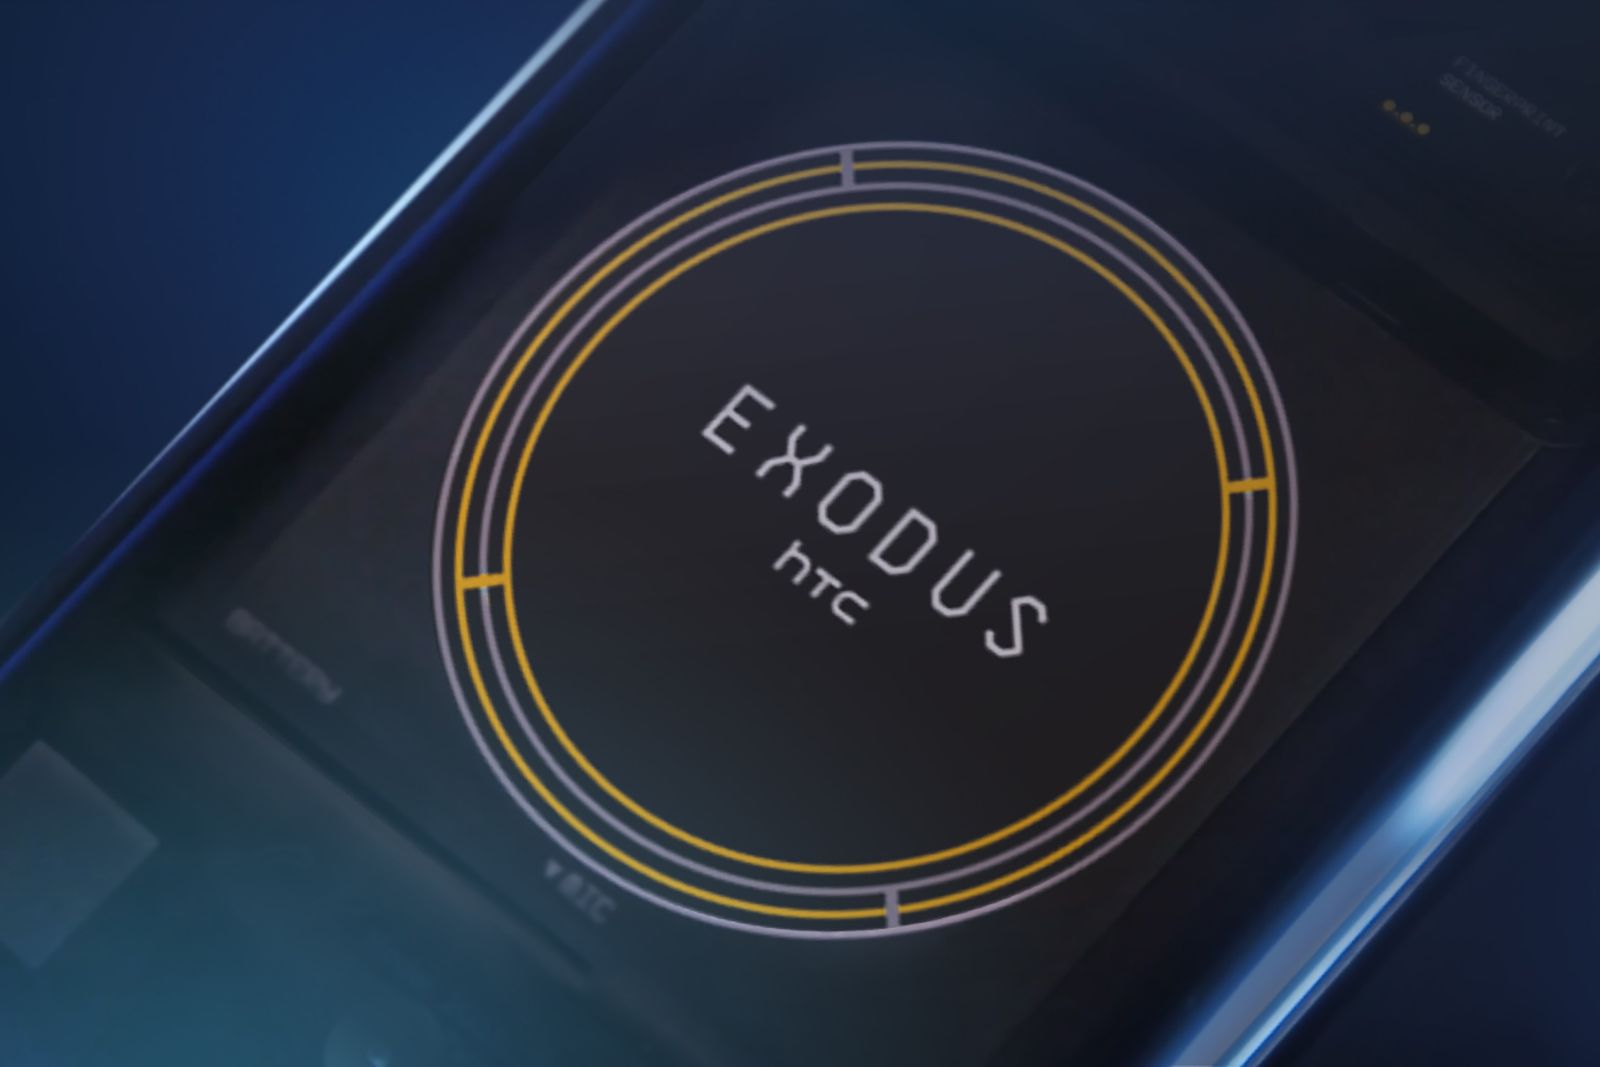 What Can You Do With The Htc Exodus I Blockchain Phone image 4